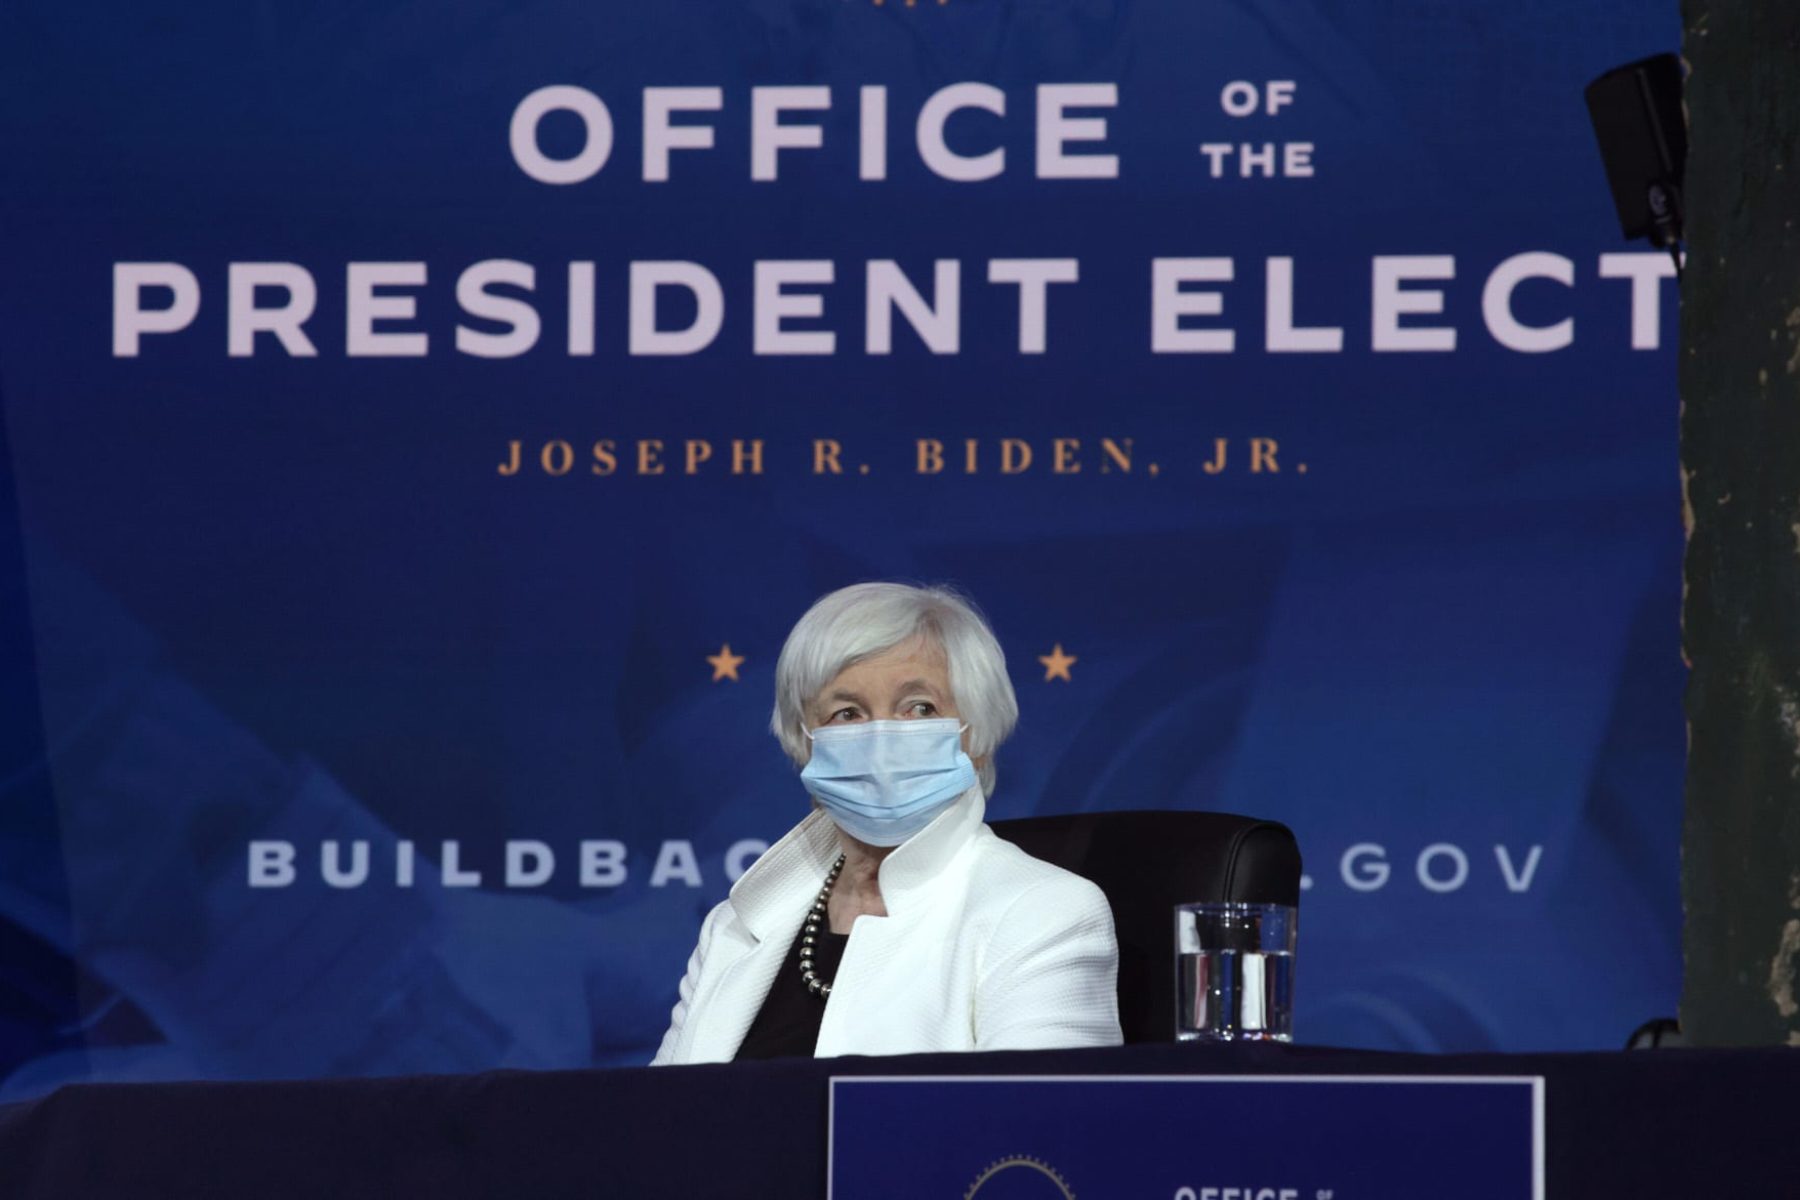 Janet Yellen looks on during an event to name President-elect Joe Biden’s economic team.